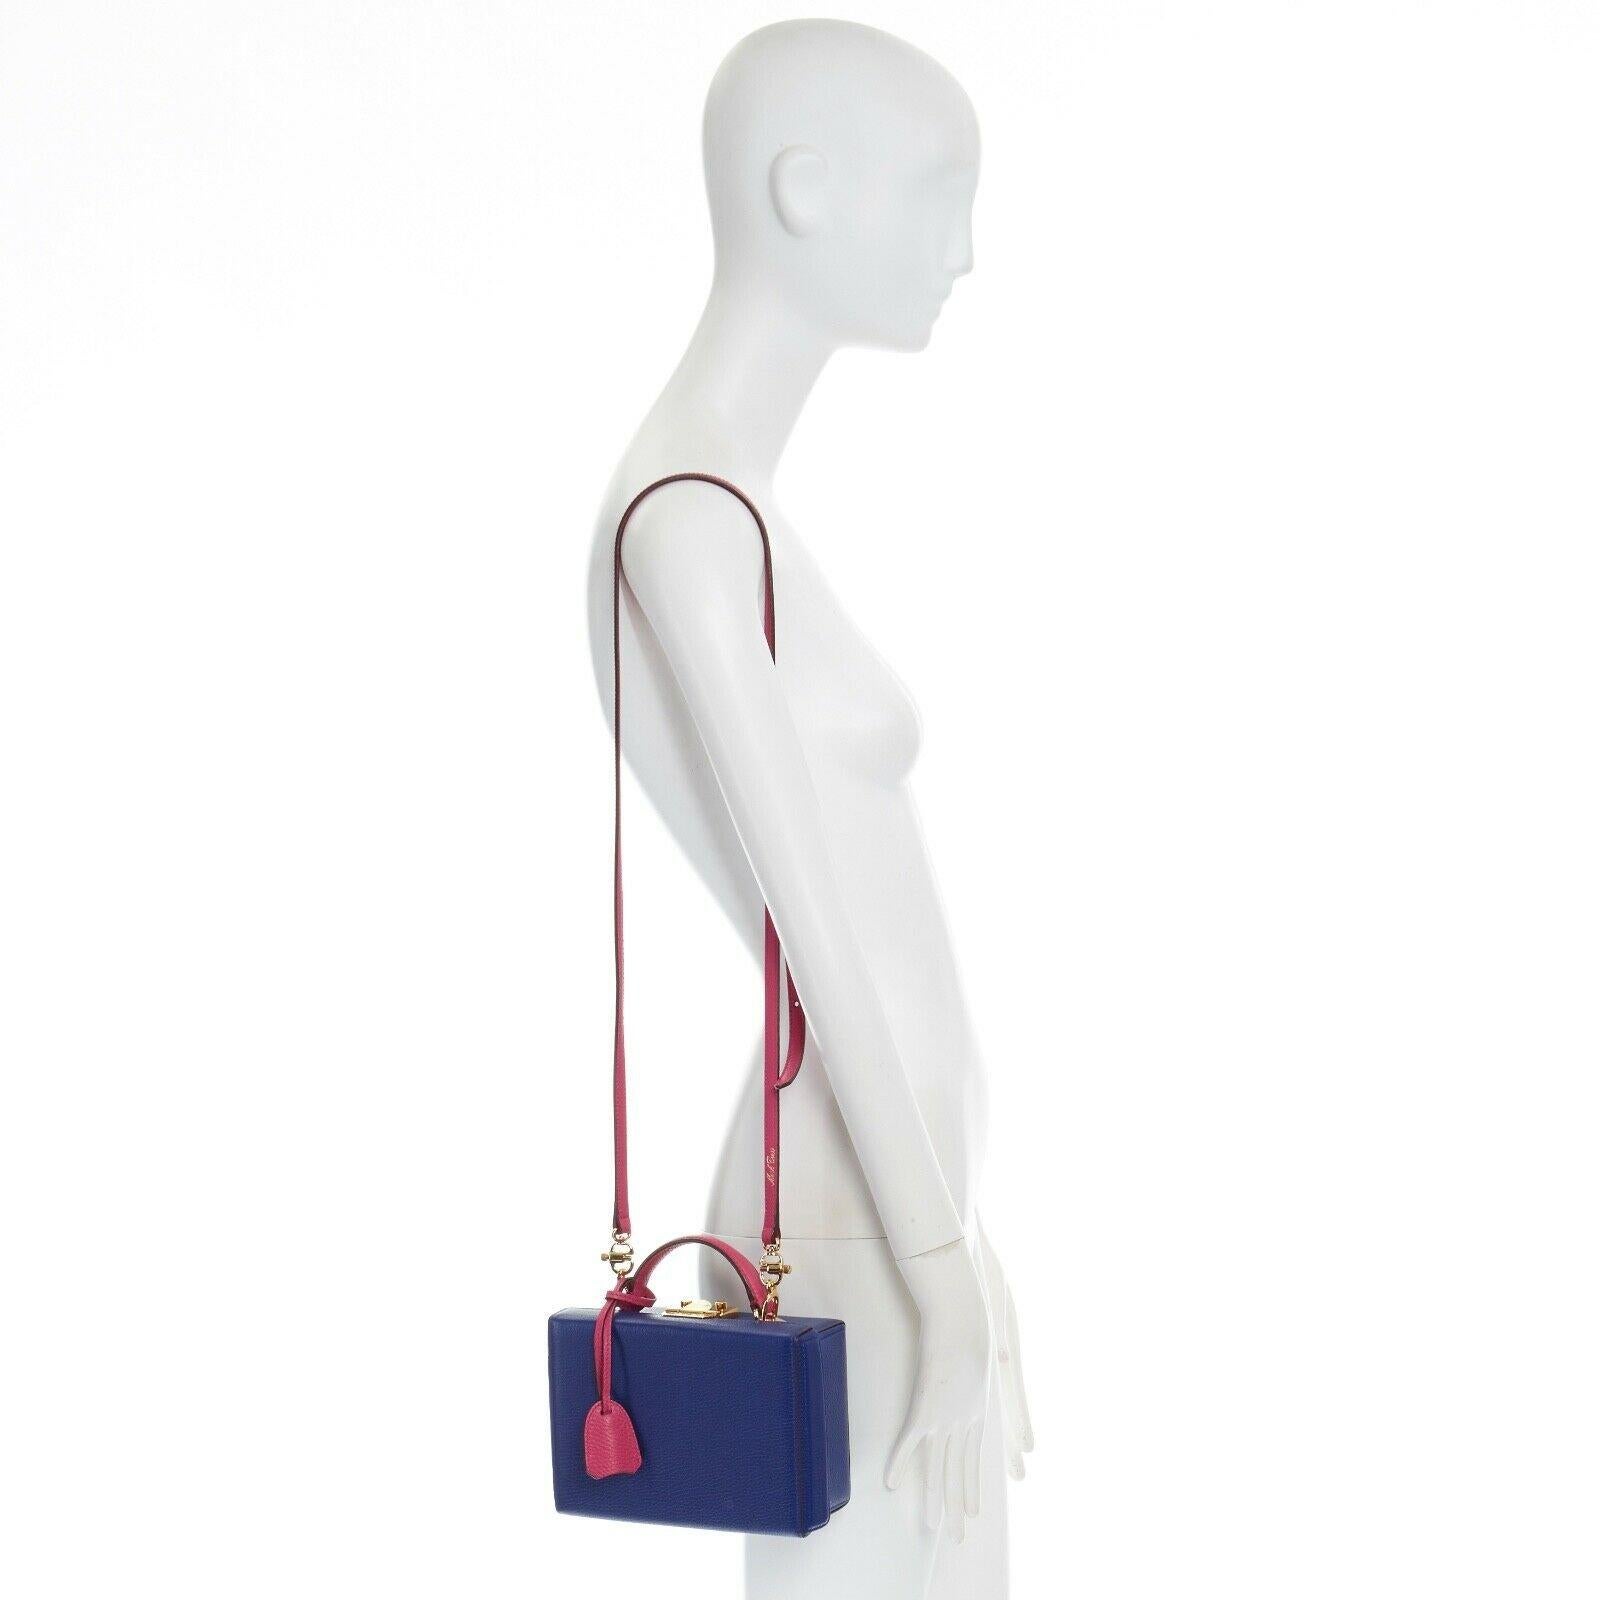 MARK CROSS Grace Box blue purple leather gold lock medium shoulder trunk bag Reference: LNKO/A00978 
Brand: Mark Cross 
Model: Grace Box 
Material: Leather 
Color: Red 
Pattern: Solid 
Closure: Clasp 
Extra Detail: Grace Box. Sea blue pebble calf